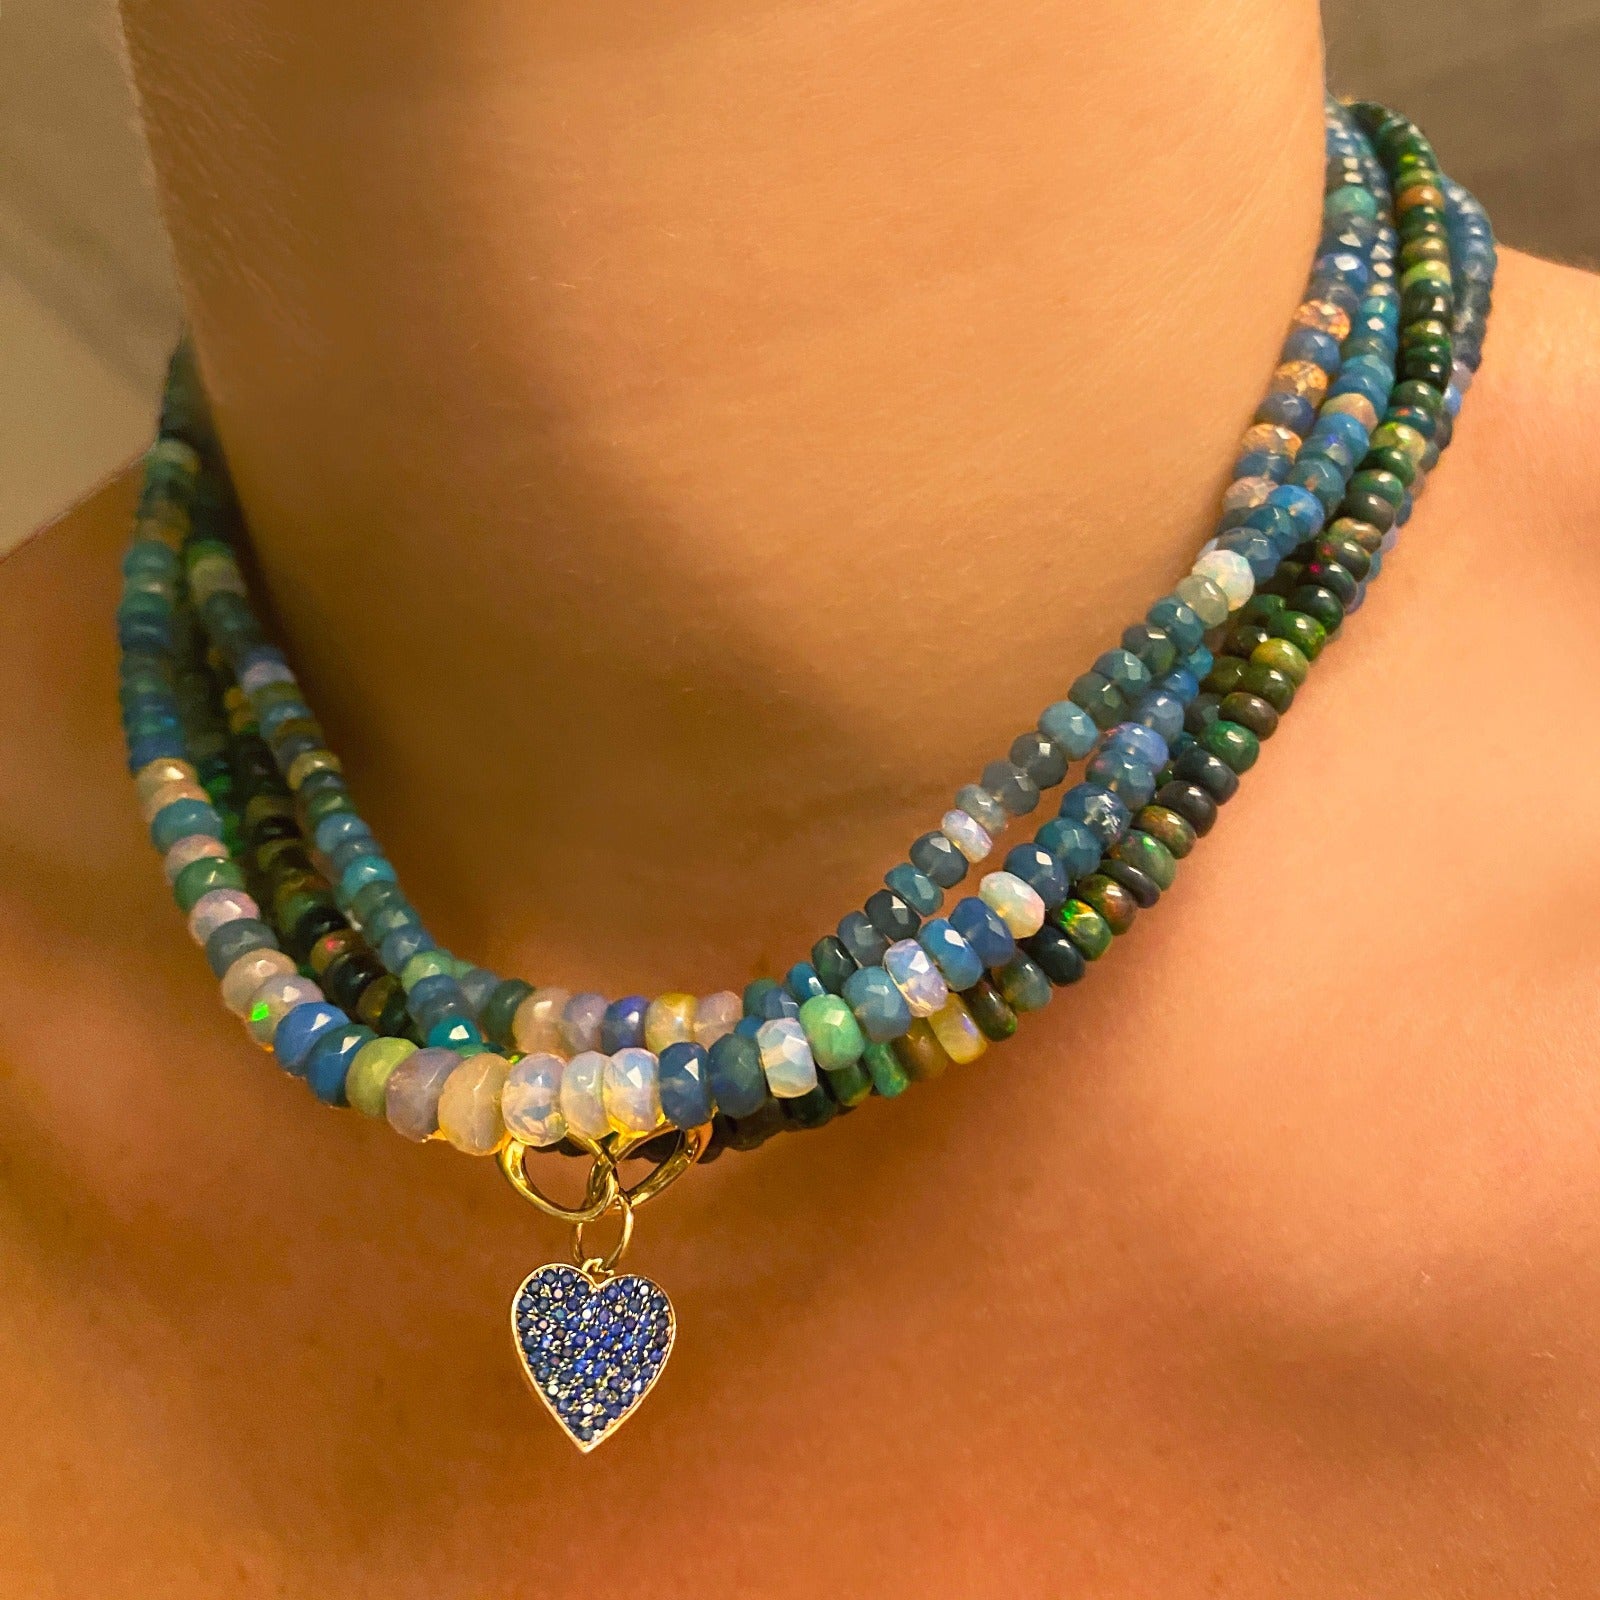 Shimmering beaded necklace made of faceted opals in shades of light blue, light purple, yellow, white, and clear on a gold linking ovals clasp. Styled on a neck with the medium pave heart charm.